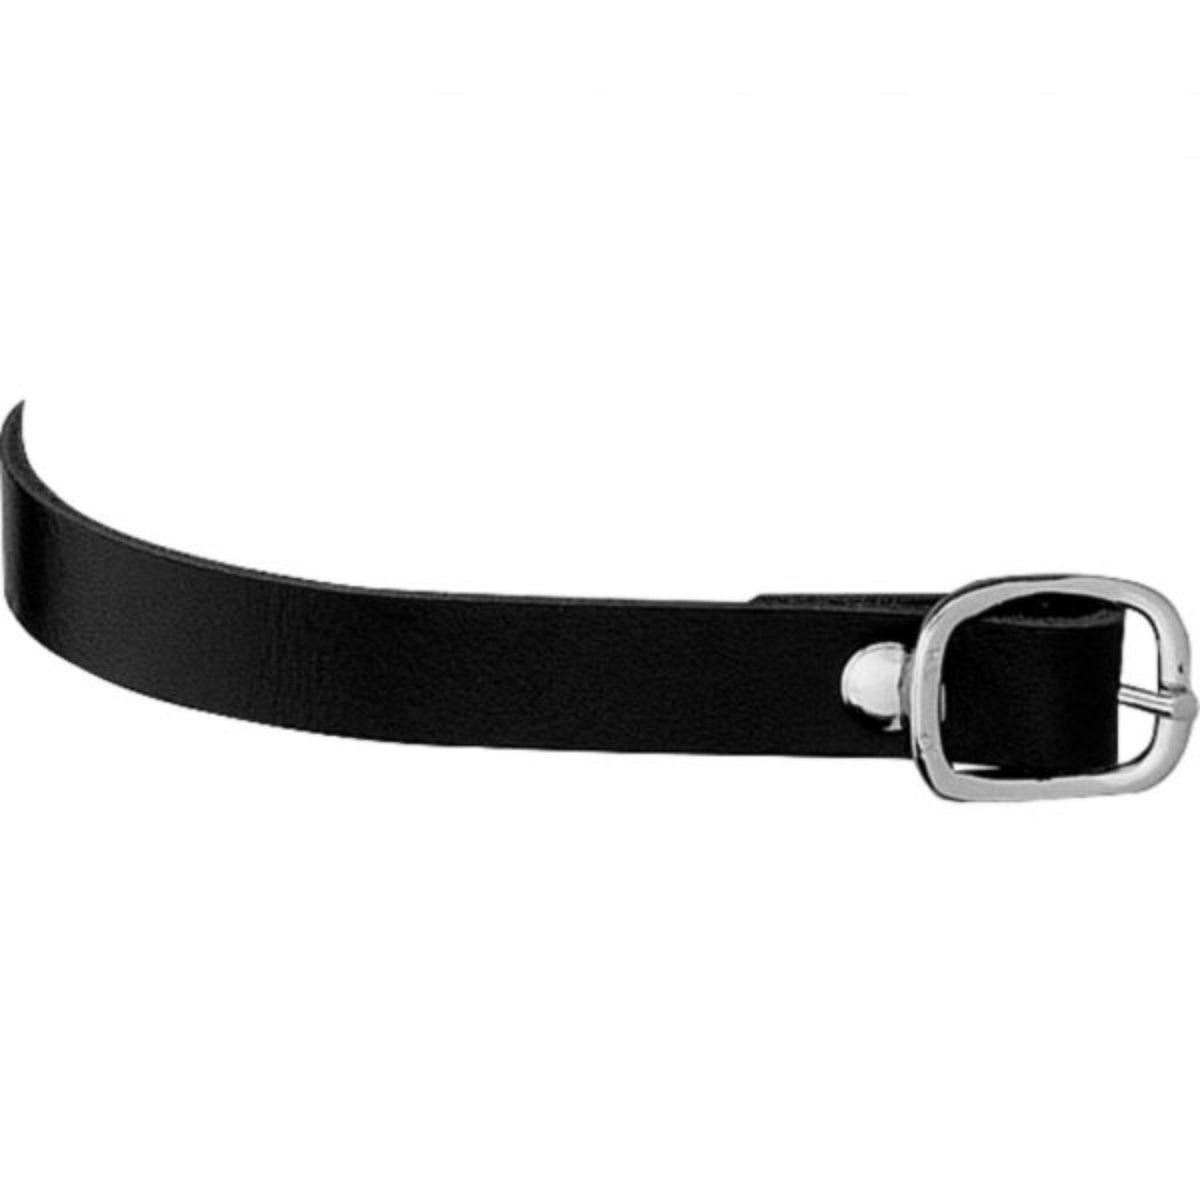 Leather spur straps with silver buckle.